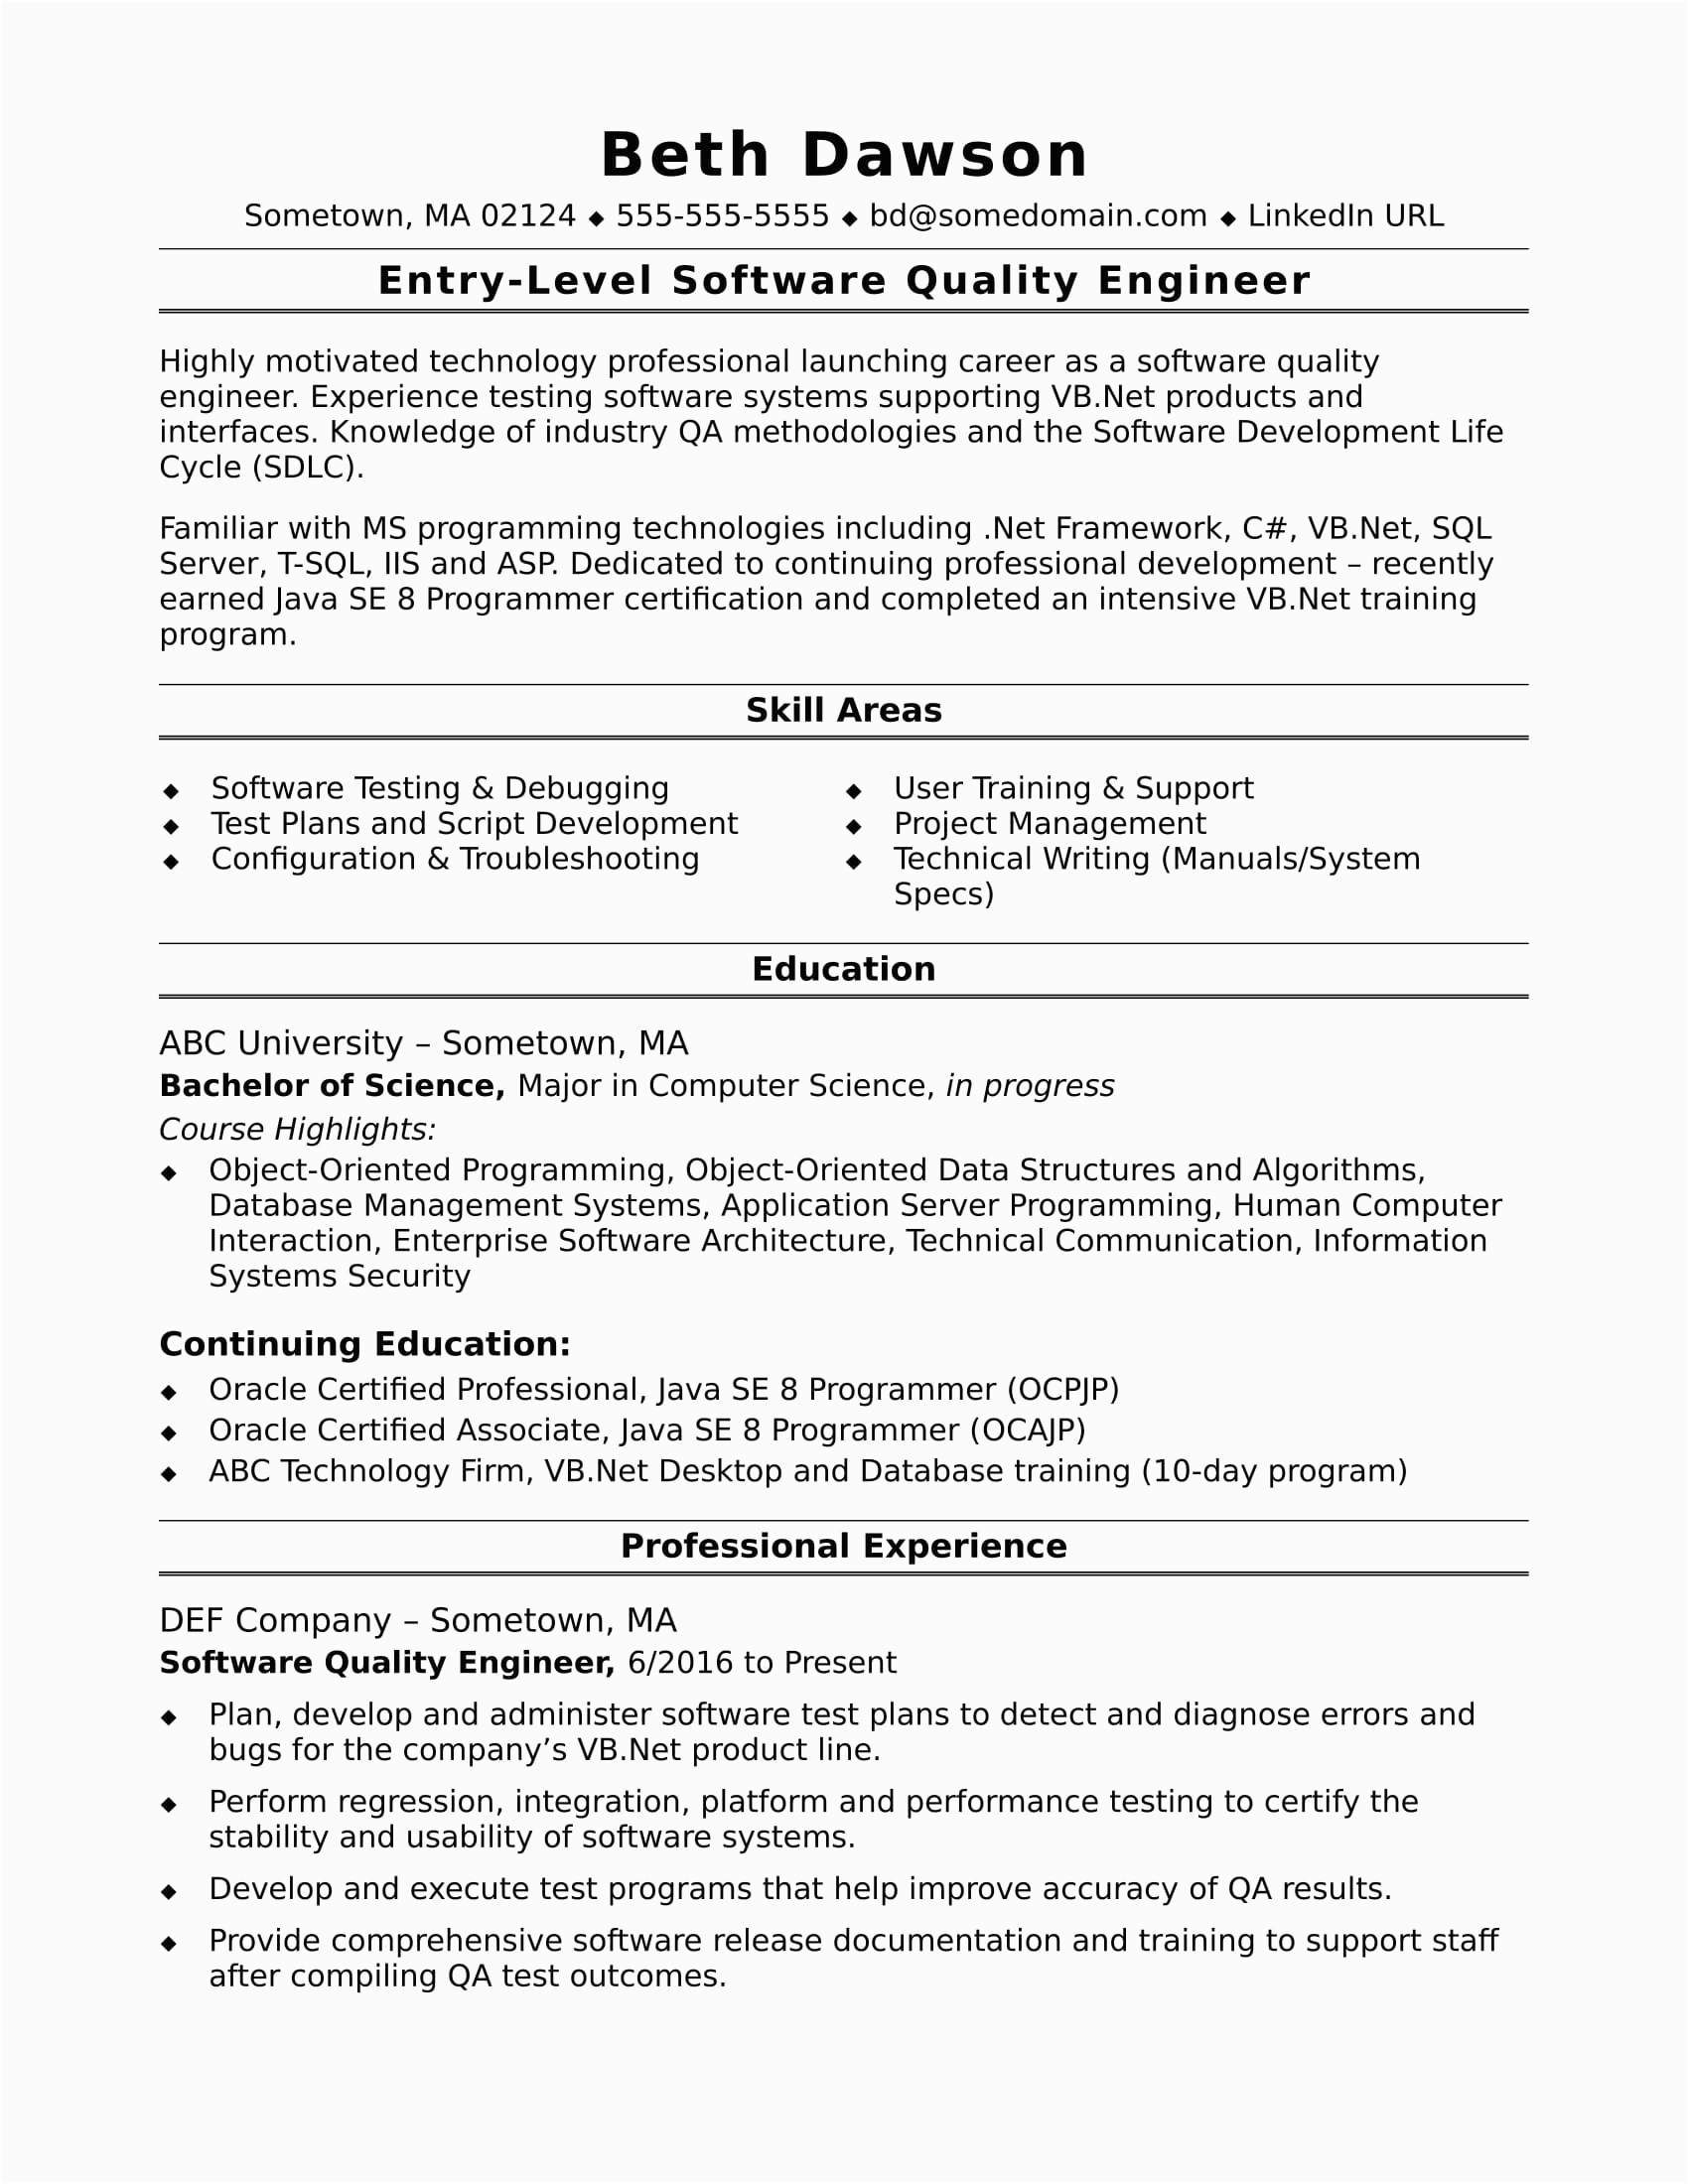 Sample Resume for Experienced Quality assurance Engineer Sample Resume for An Entry Level Quality Engineer